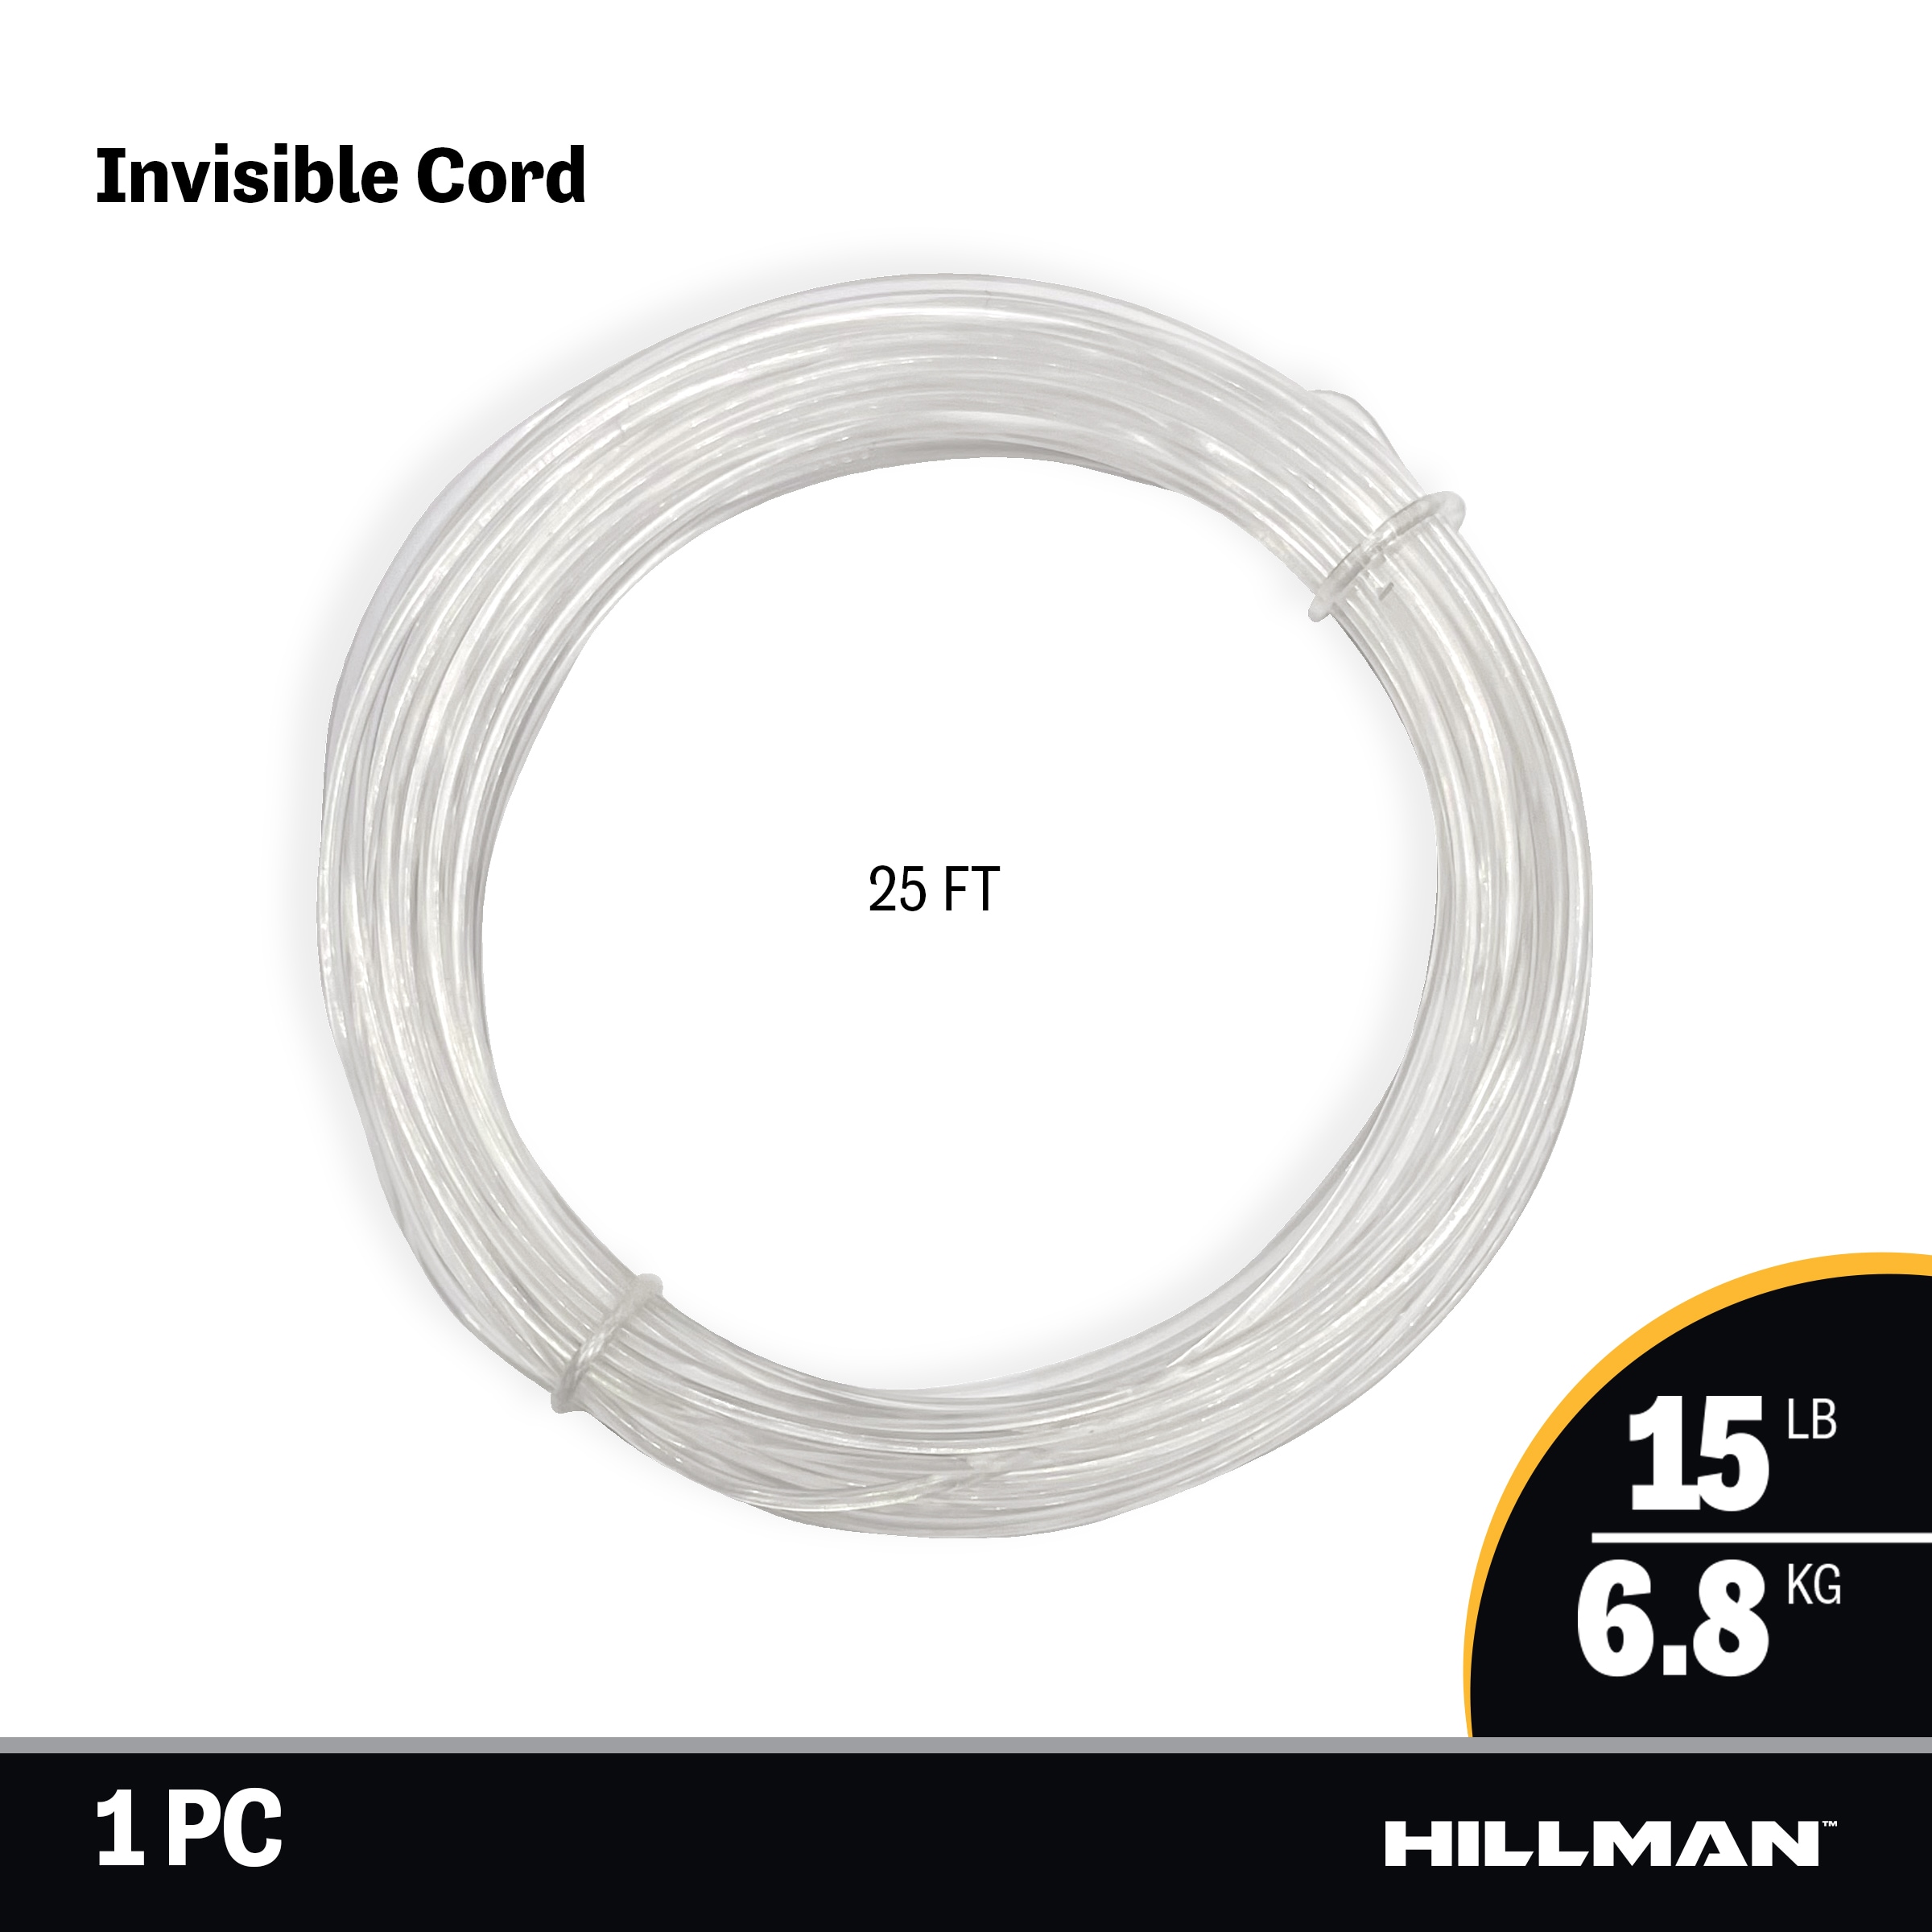 Hillman Invisible Cord 25-ft 15 Lbs in the Picture Hangers